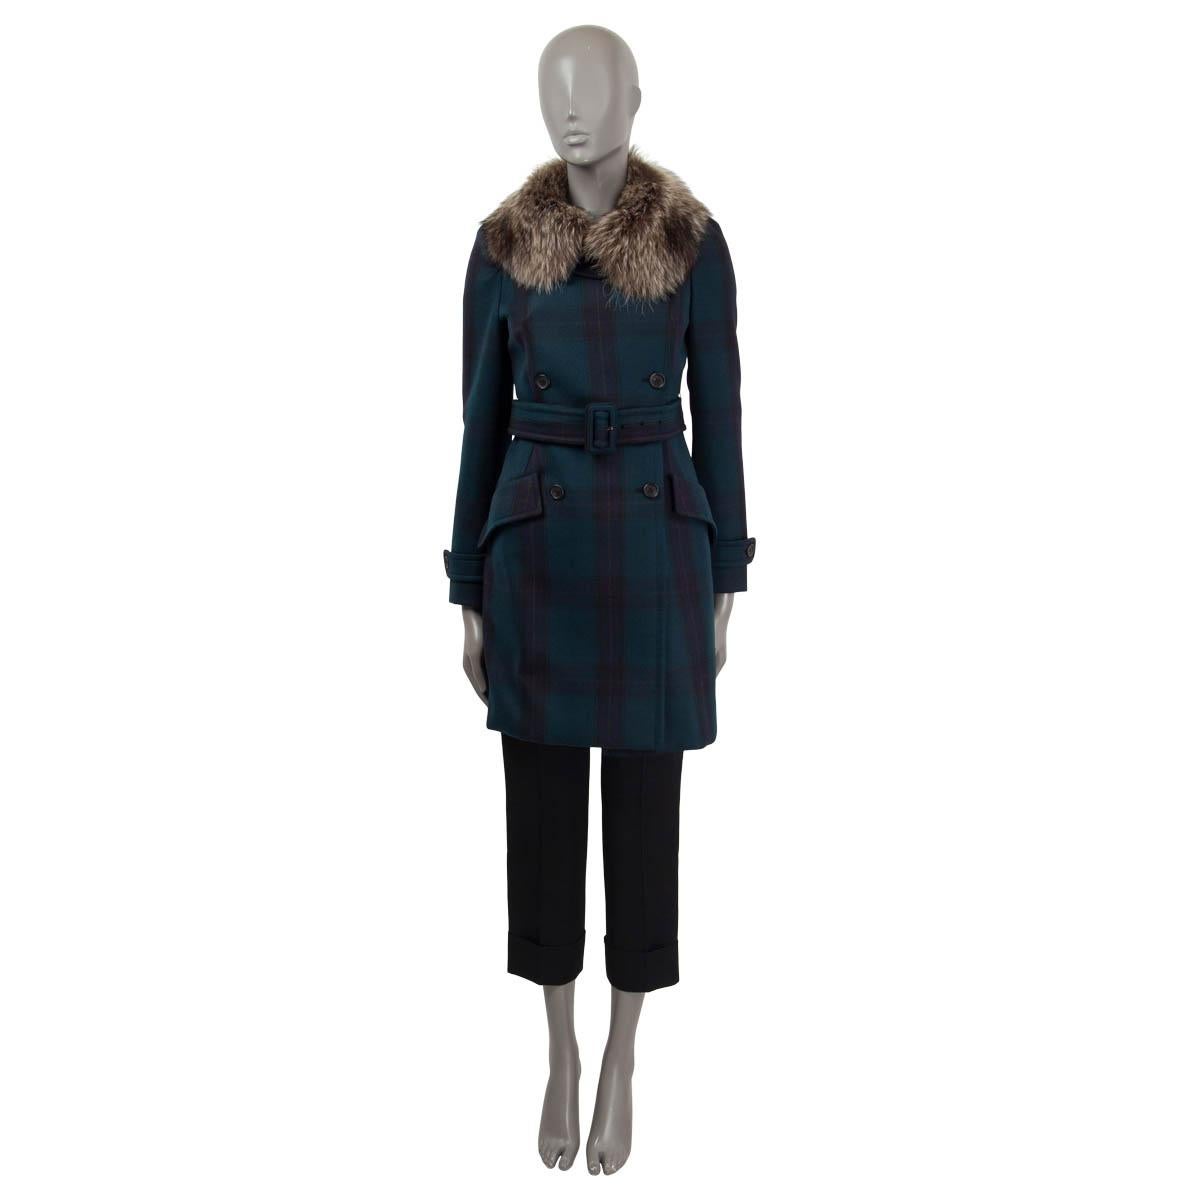 100% authentic Miu Miu double breasted coat in petrol, purple and black wool (100%). Features a detachable raccoon fur (100%) collar and a matching detachable belt. Has two flap pockets, a slit on the back and epaulettes on the cuffs. Opens with